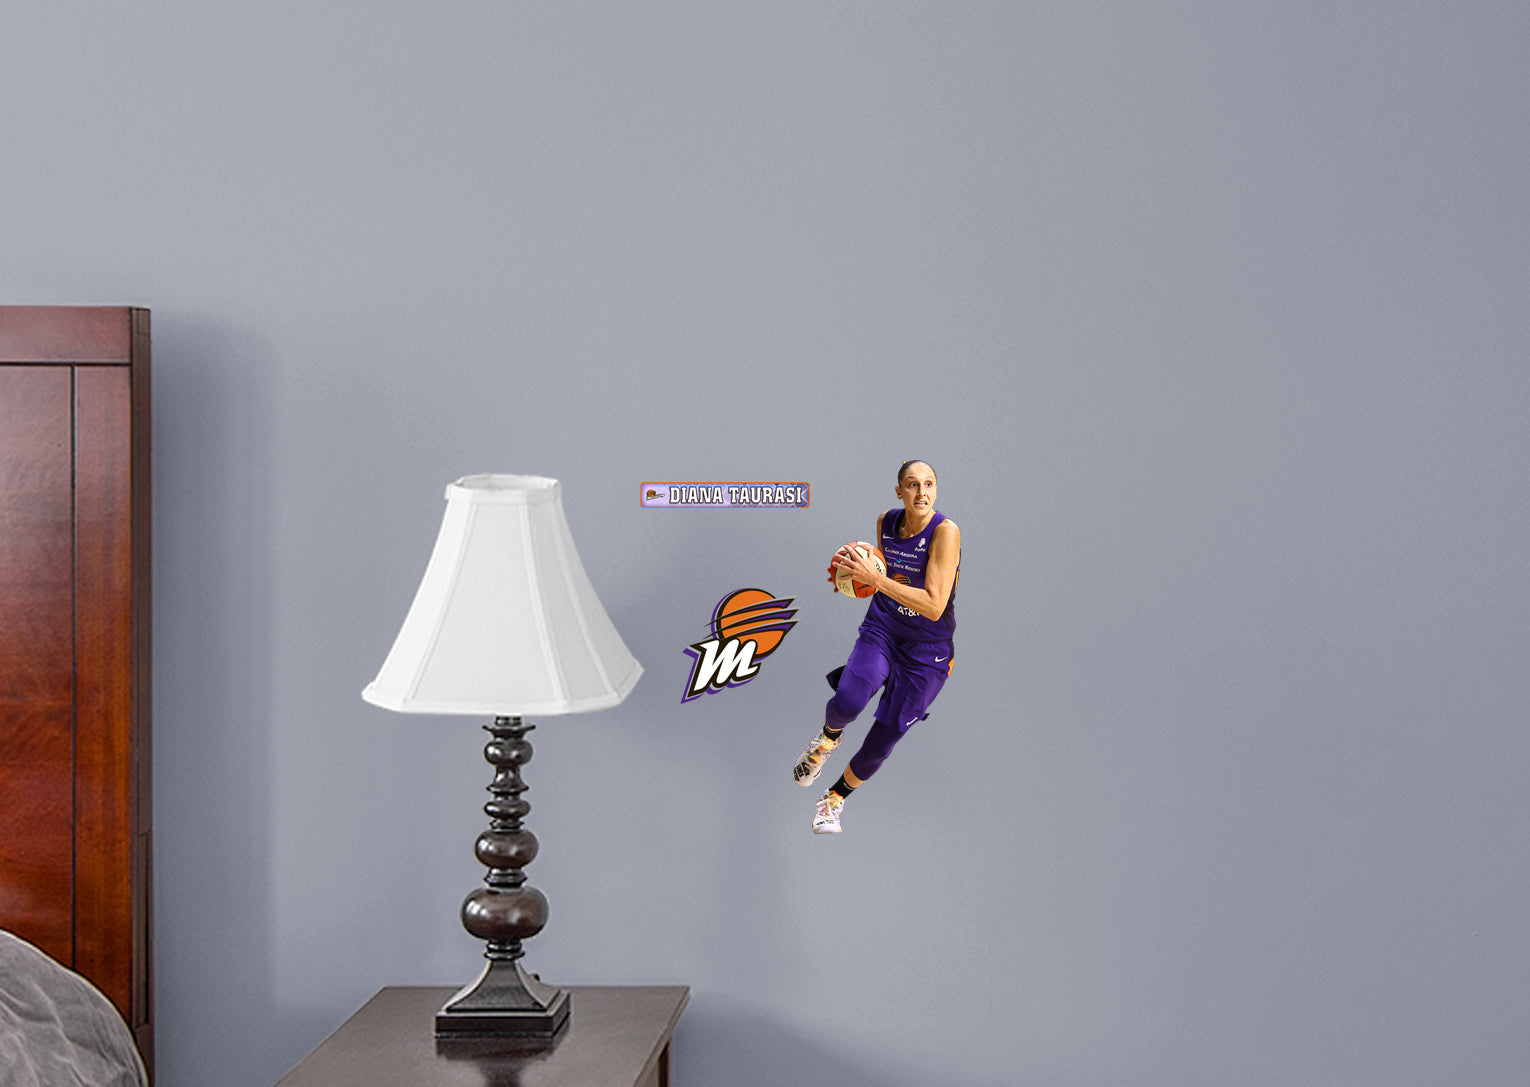 Diana Taurasi 2020 RealBig for Phoenix Mercury - Officially Licensed WNBA Removable Wall Decal Large by Fathead | Vinyl